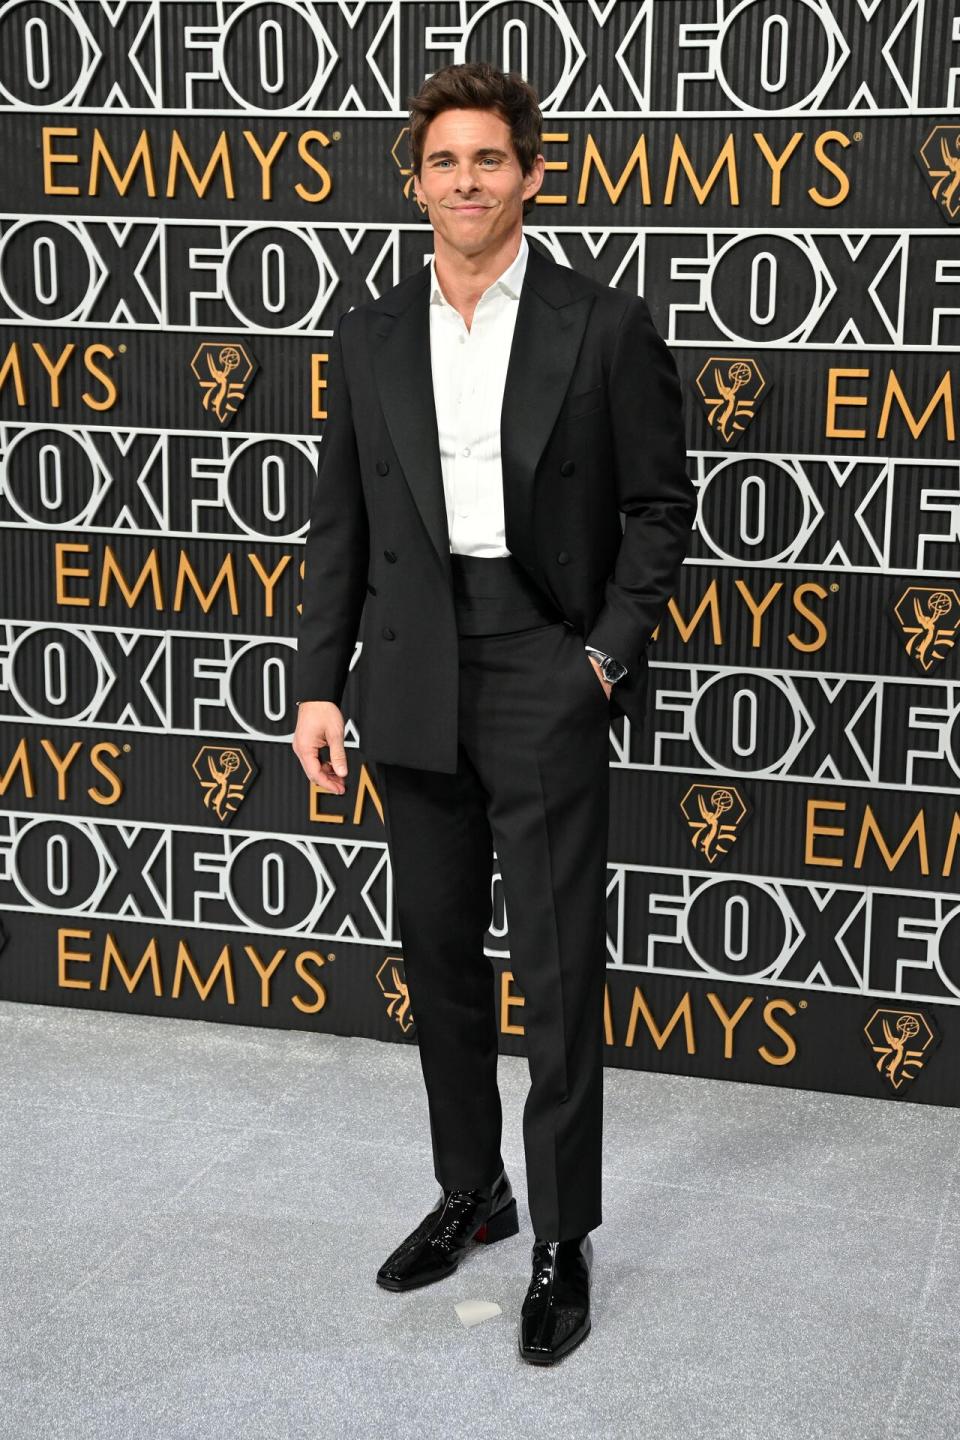 Jury Duty actor James Marsden, who was nominated for outstanding supporting actor in a comedy series, is styled in a classic suit jacket and slacks with a crisp white button down shirt.